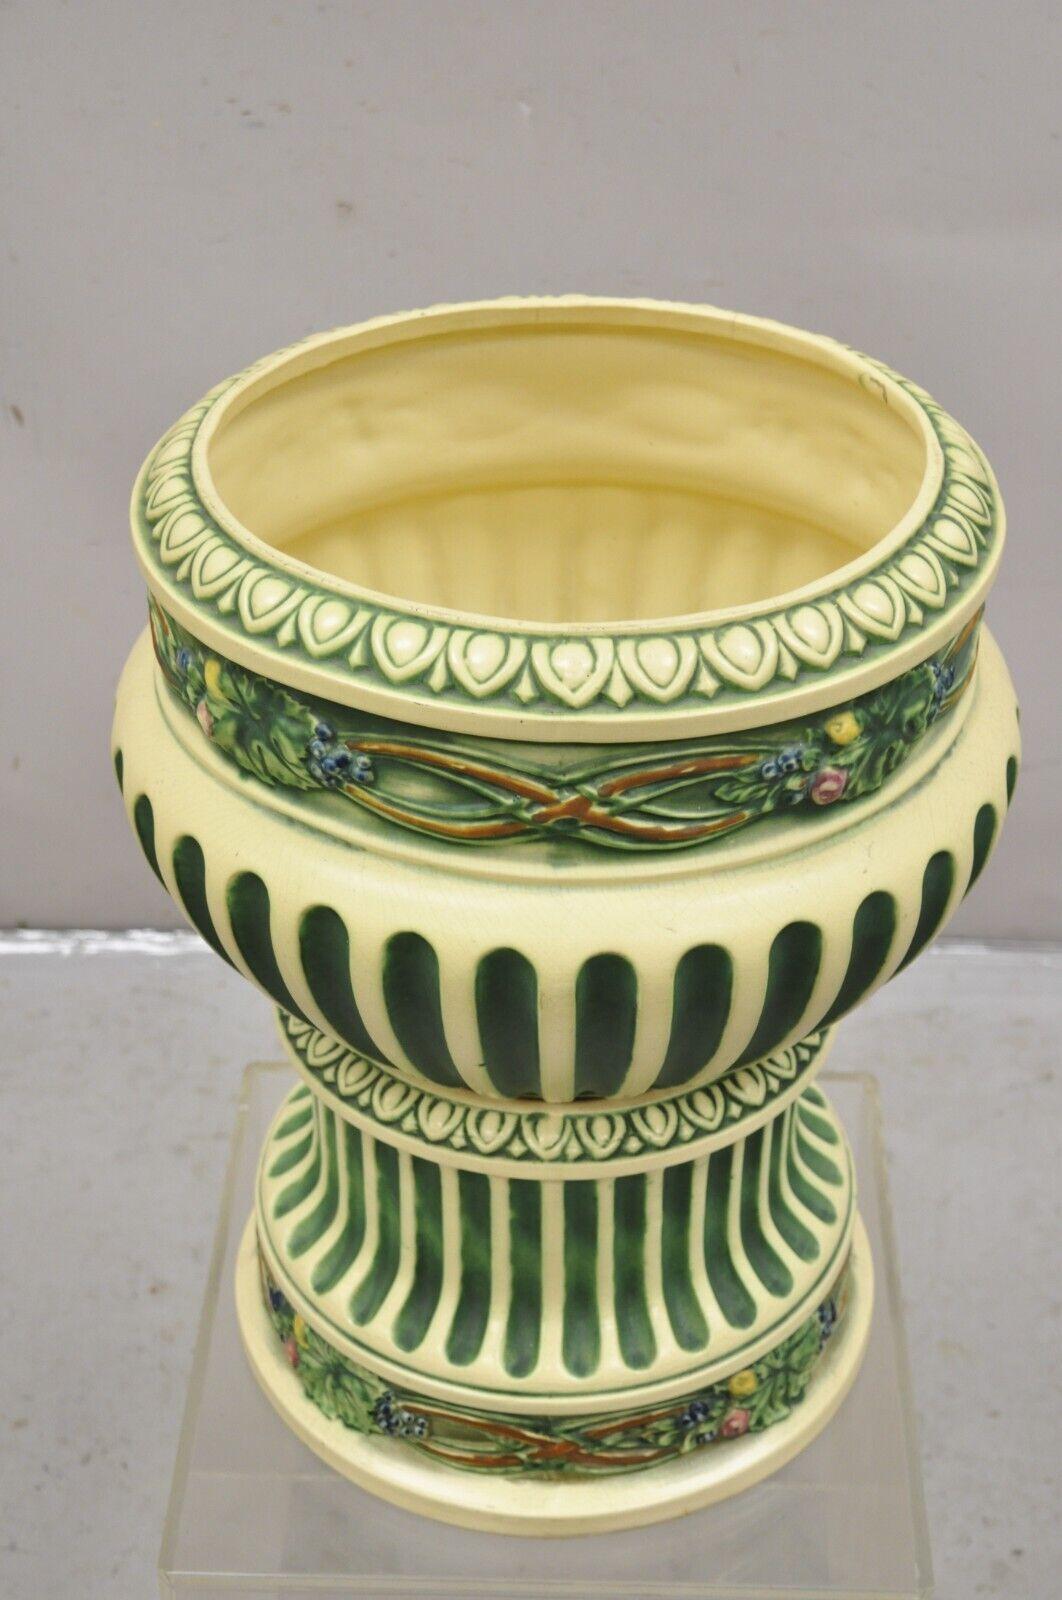 Antique Roseville Corinthian Pattern Jardiniere Planter and Rare Low Pedestal. Circa Early 1900s.
Measurements: 
Overall: 22